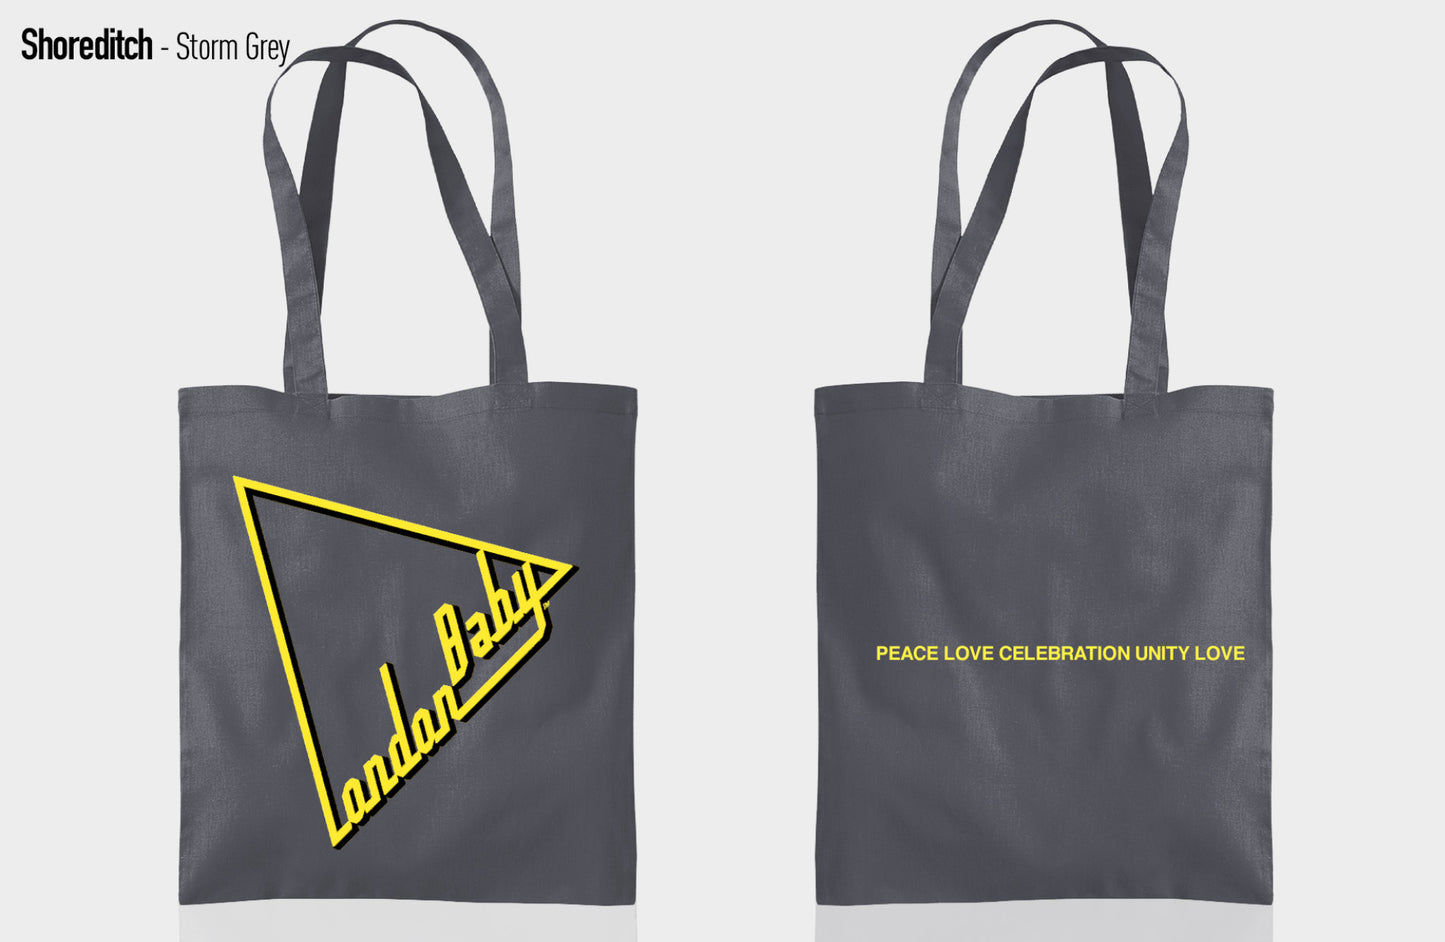 Totelly LondonBaby Tote Bag -  SHOREDITCH Design. Limited designs available via email £12.99